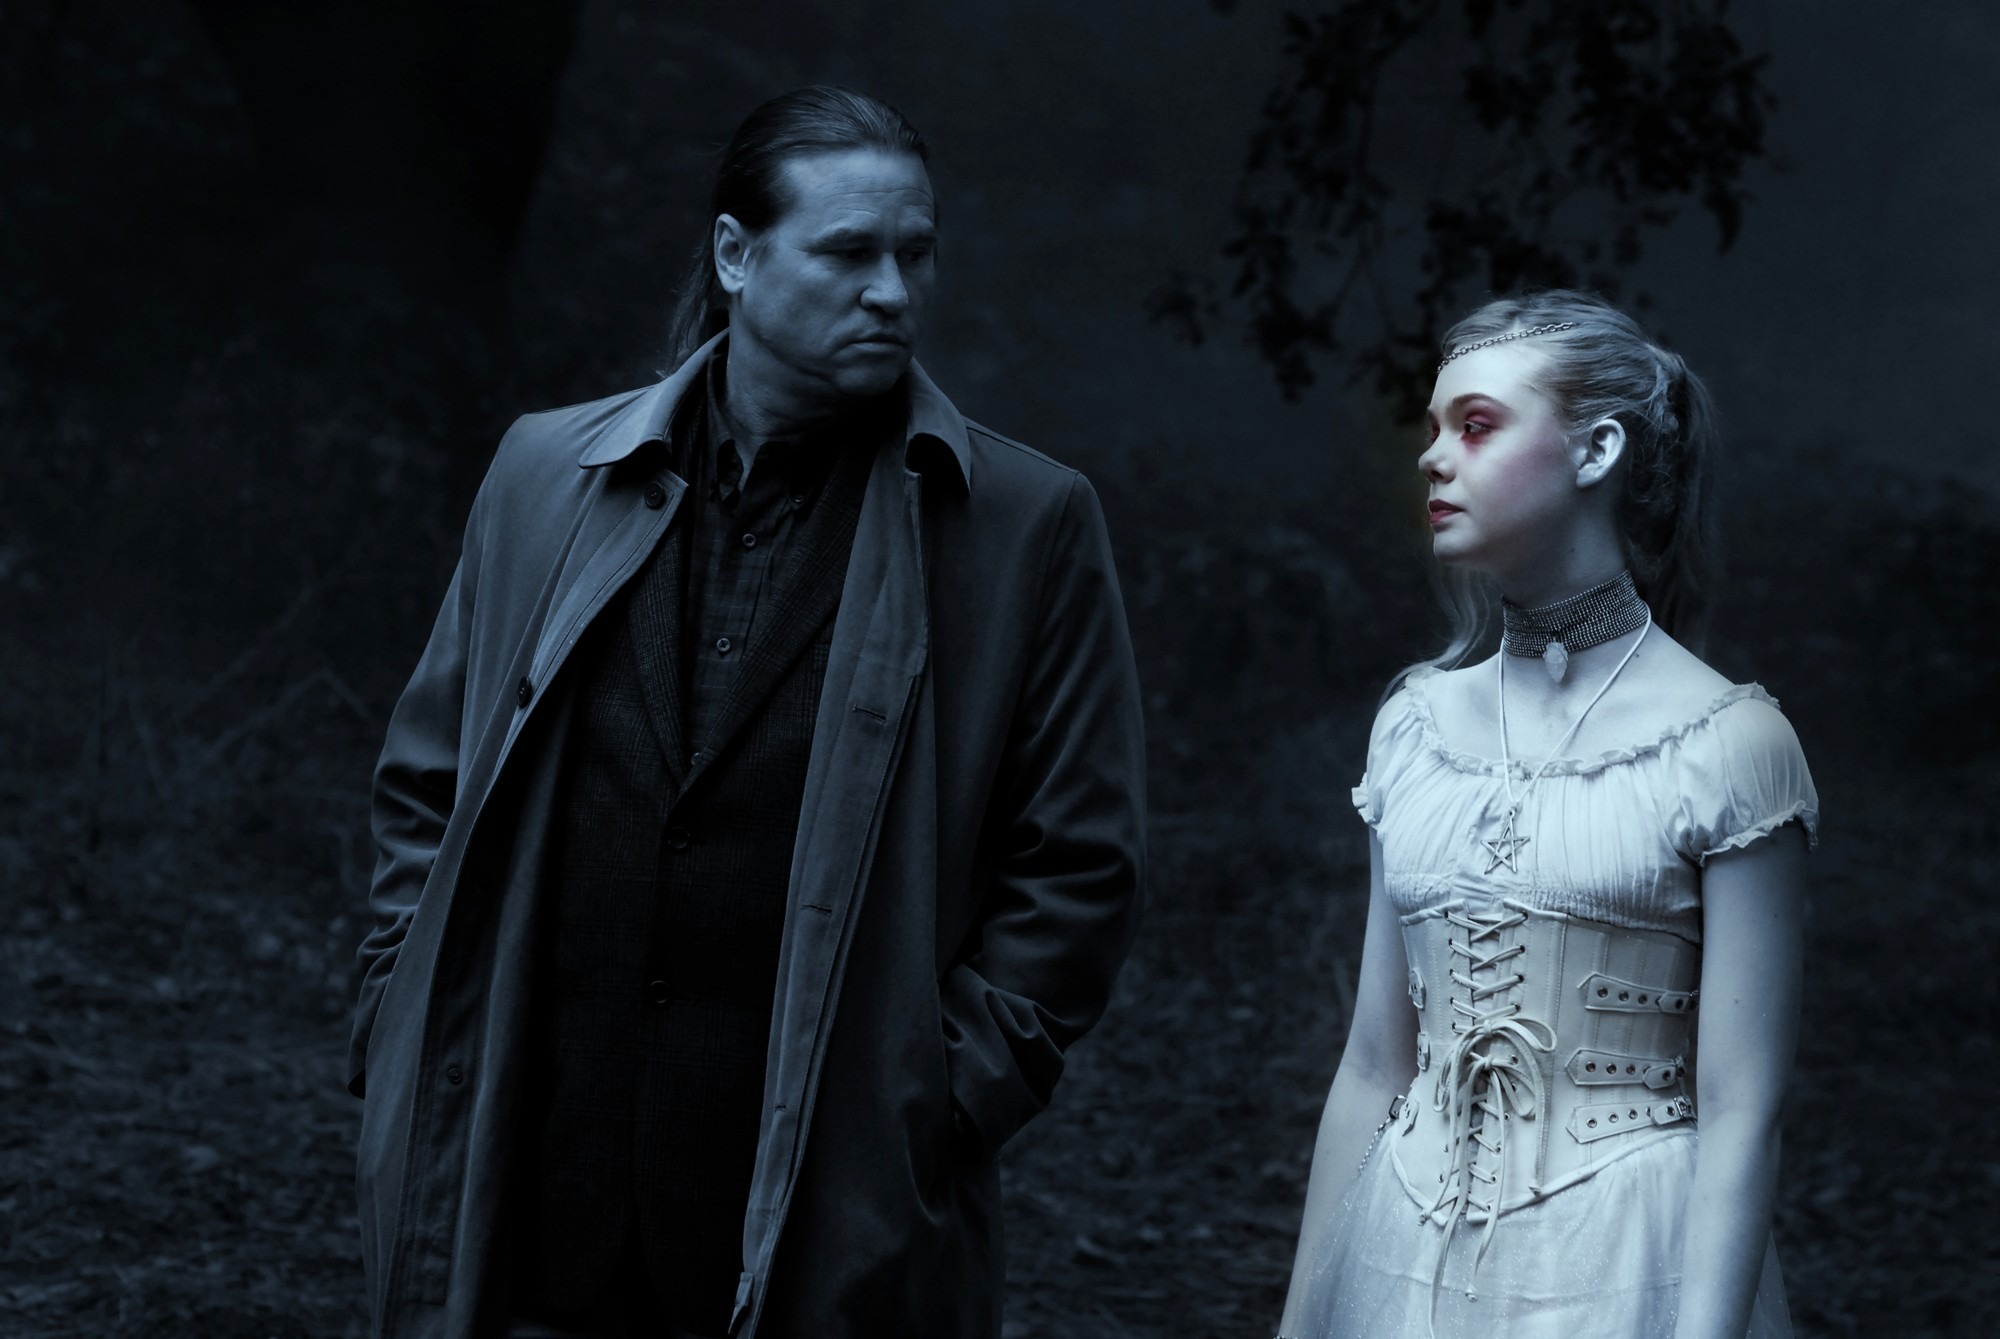 Val Kilmer stars as Hall Baltimore and Elle Fanning stars as V in American Zoetrope's Twixt (2012)